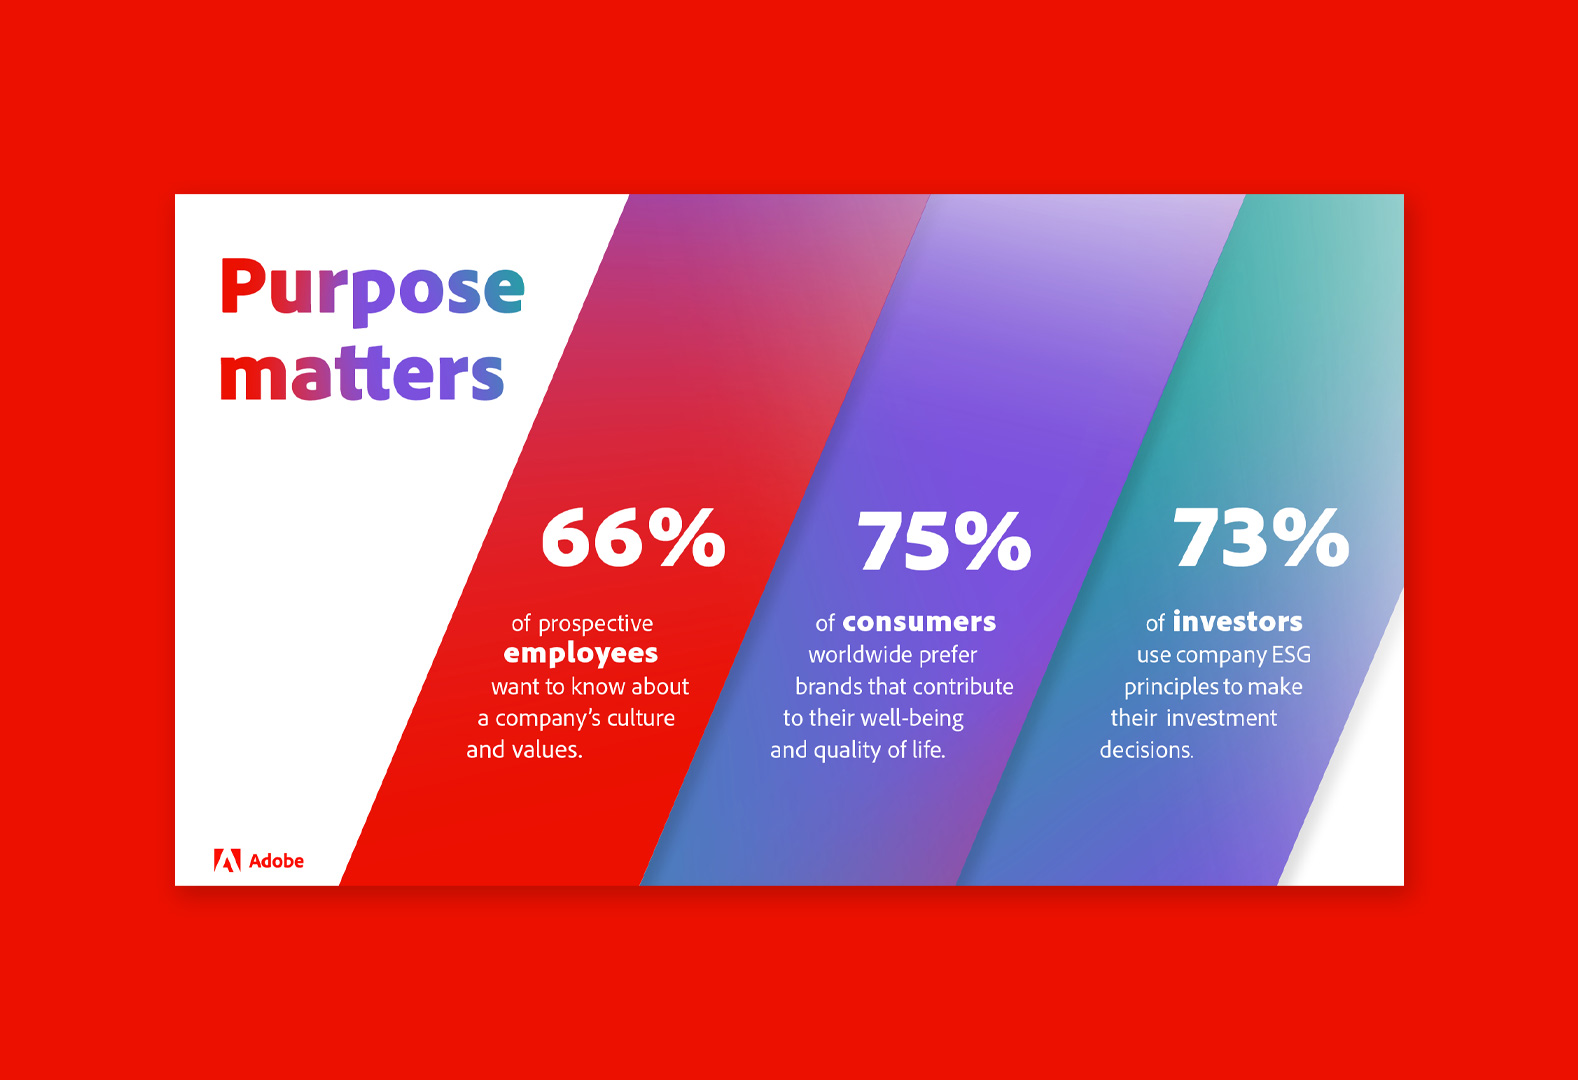 Infographic showing that purpose matters to employees, customers, and investors.